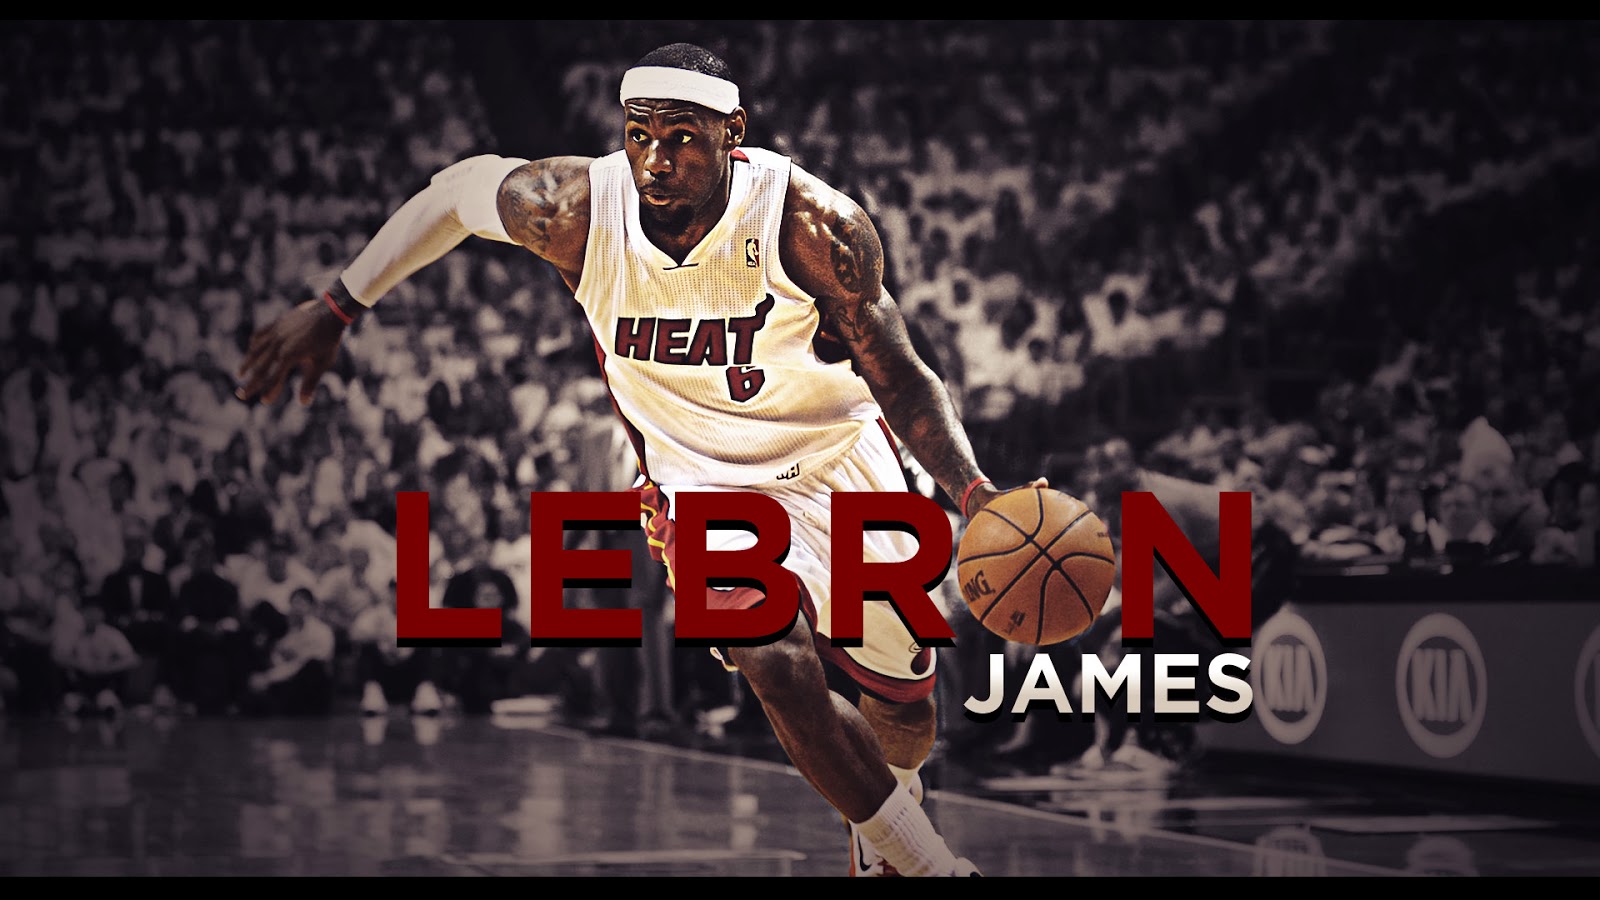 Its All About Basketball Lebron James New Wallpaper 2014